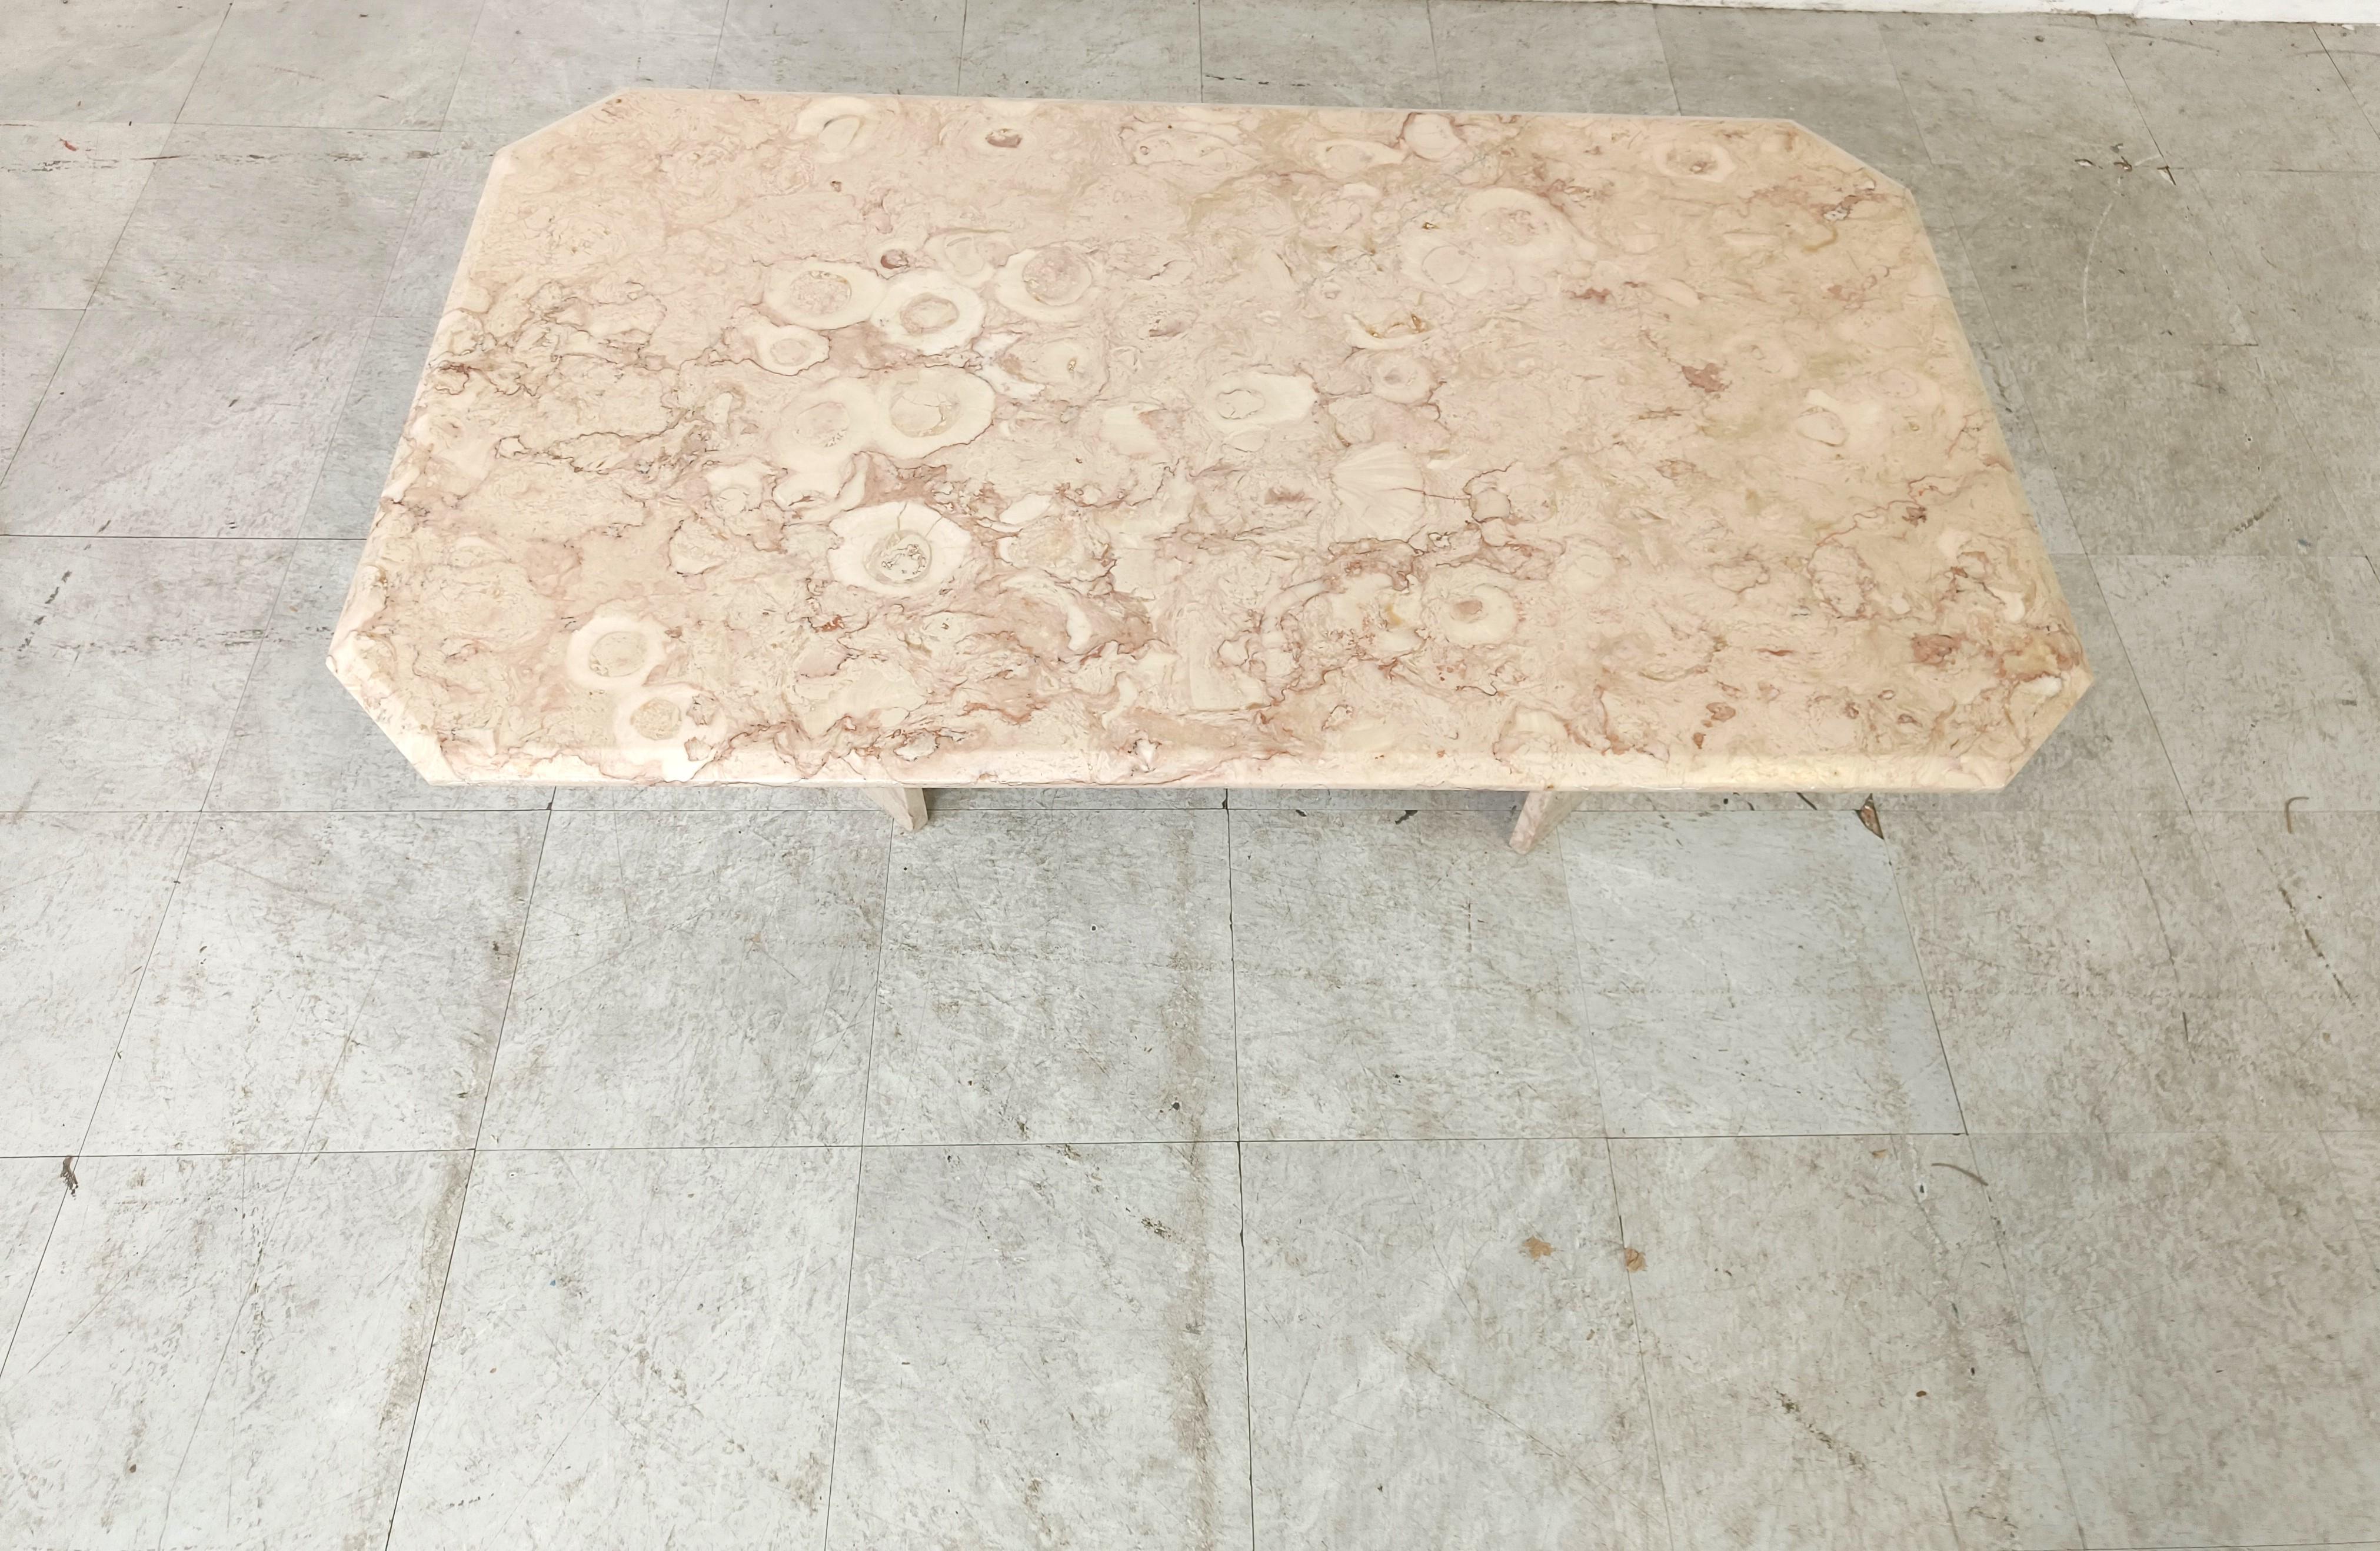 Beautiful fossil stone coffee table with a beveled table top and triangular bases.

We are not sure about the stone species, but it has a fossil like pattern.

1970s - Italy

Good condition

Dimensions:
Height: 40cm/15.74